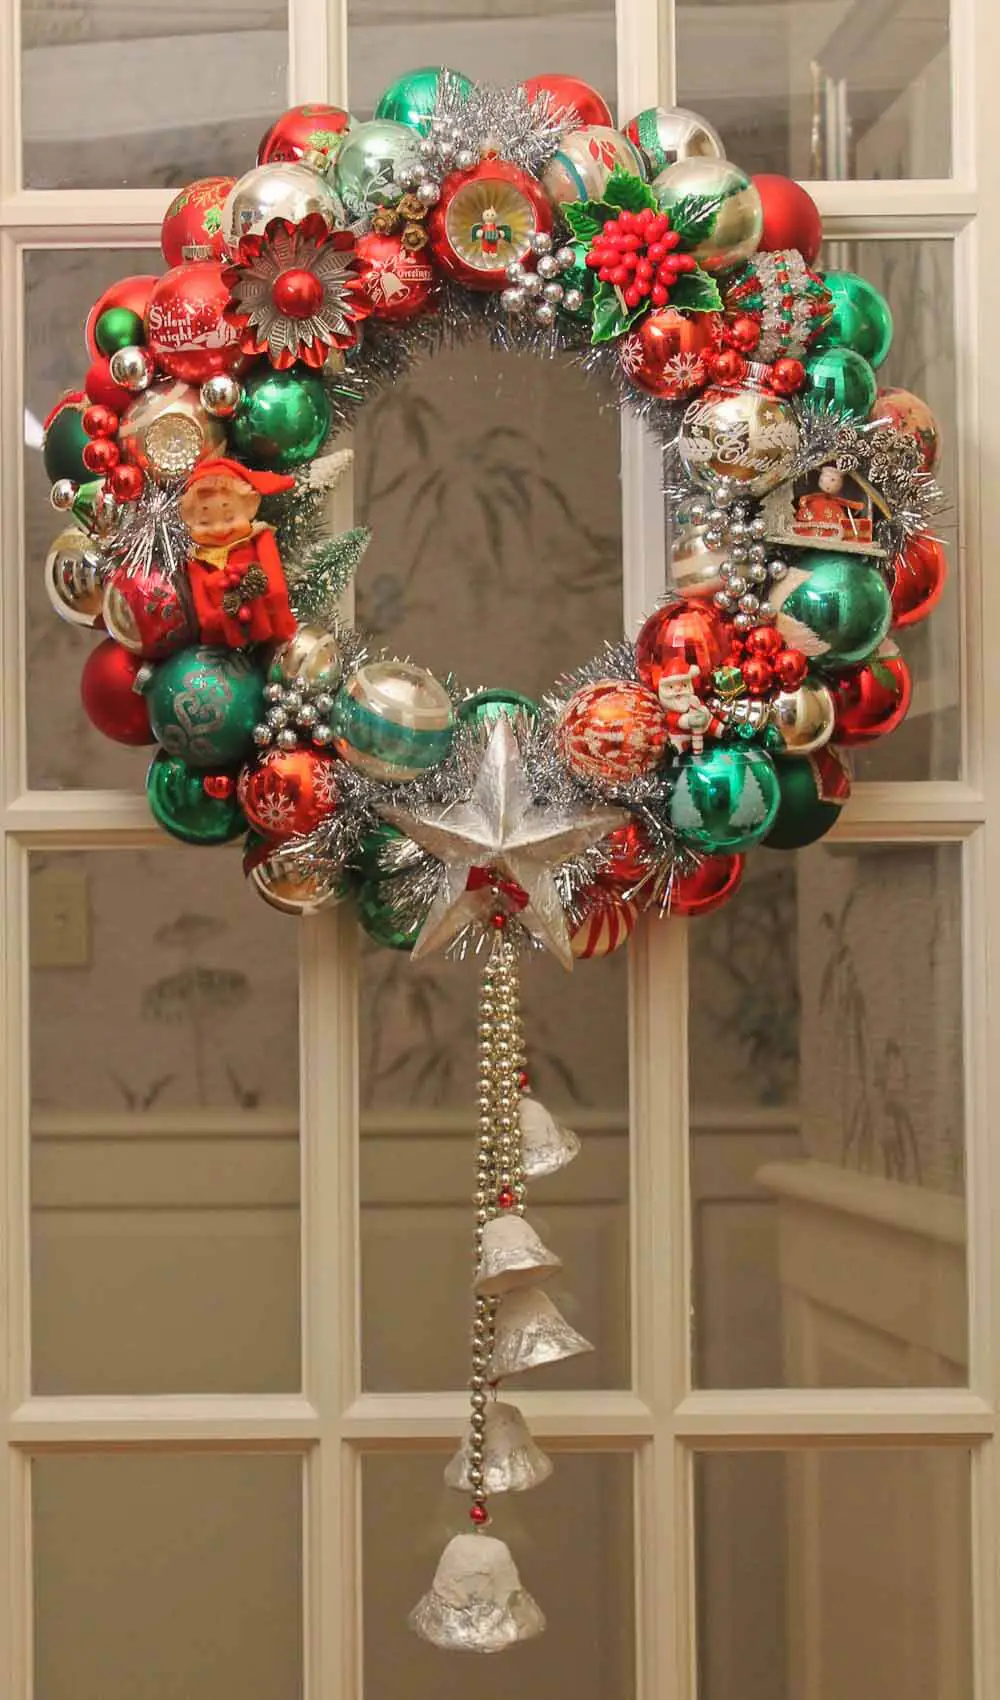 chrismas ornament wreath with hanging bells made from vintage ornaments